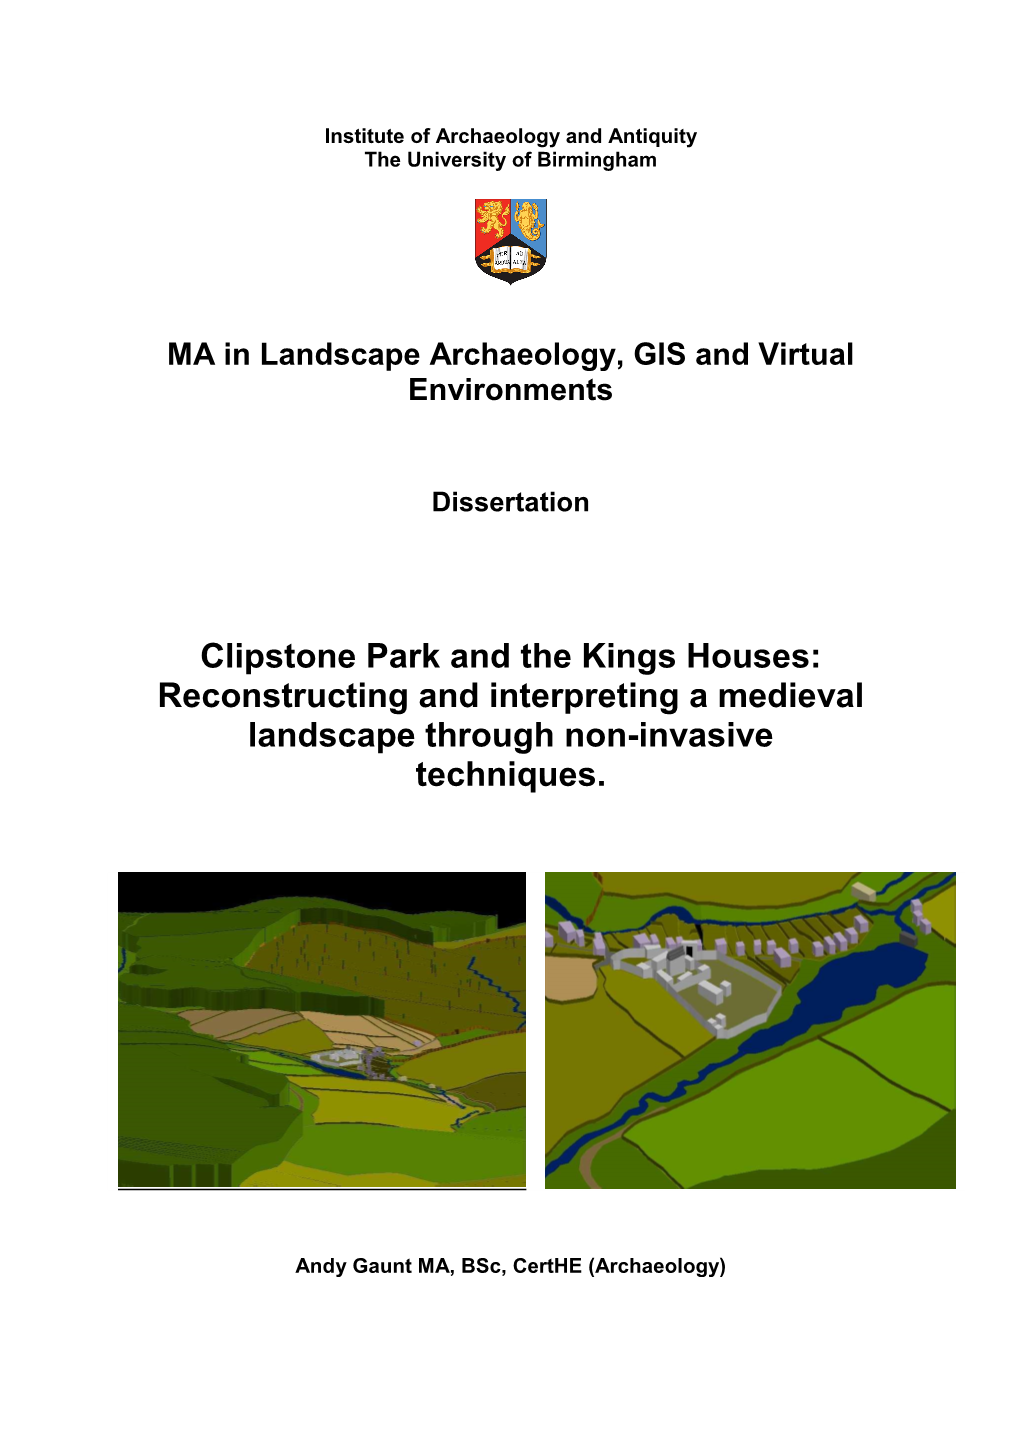 Clipstone Park and the Kings Houses: Reconstructing and Interpreting a Medieval Landscape Through Non-Invasive Techniques